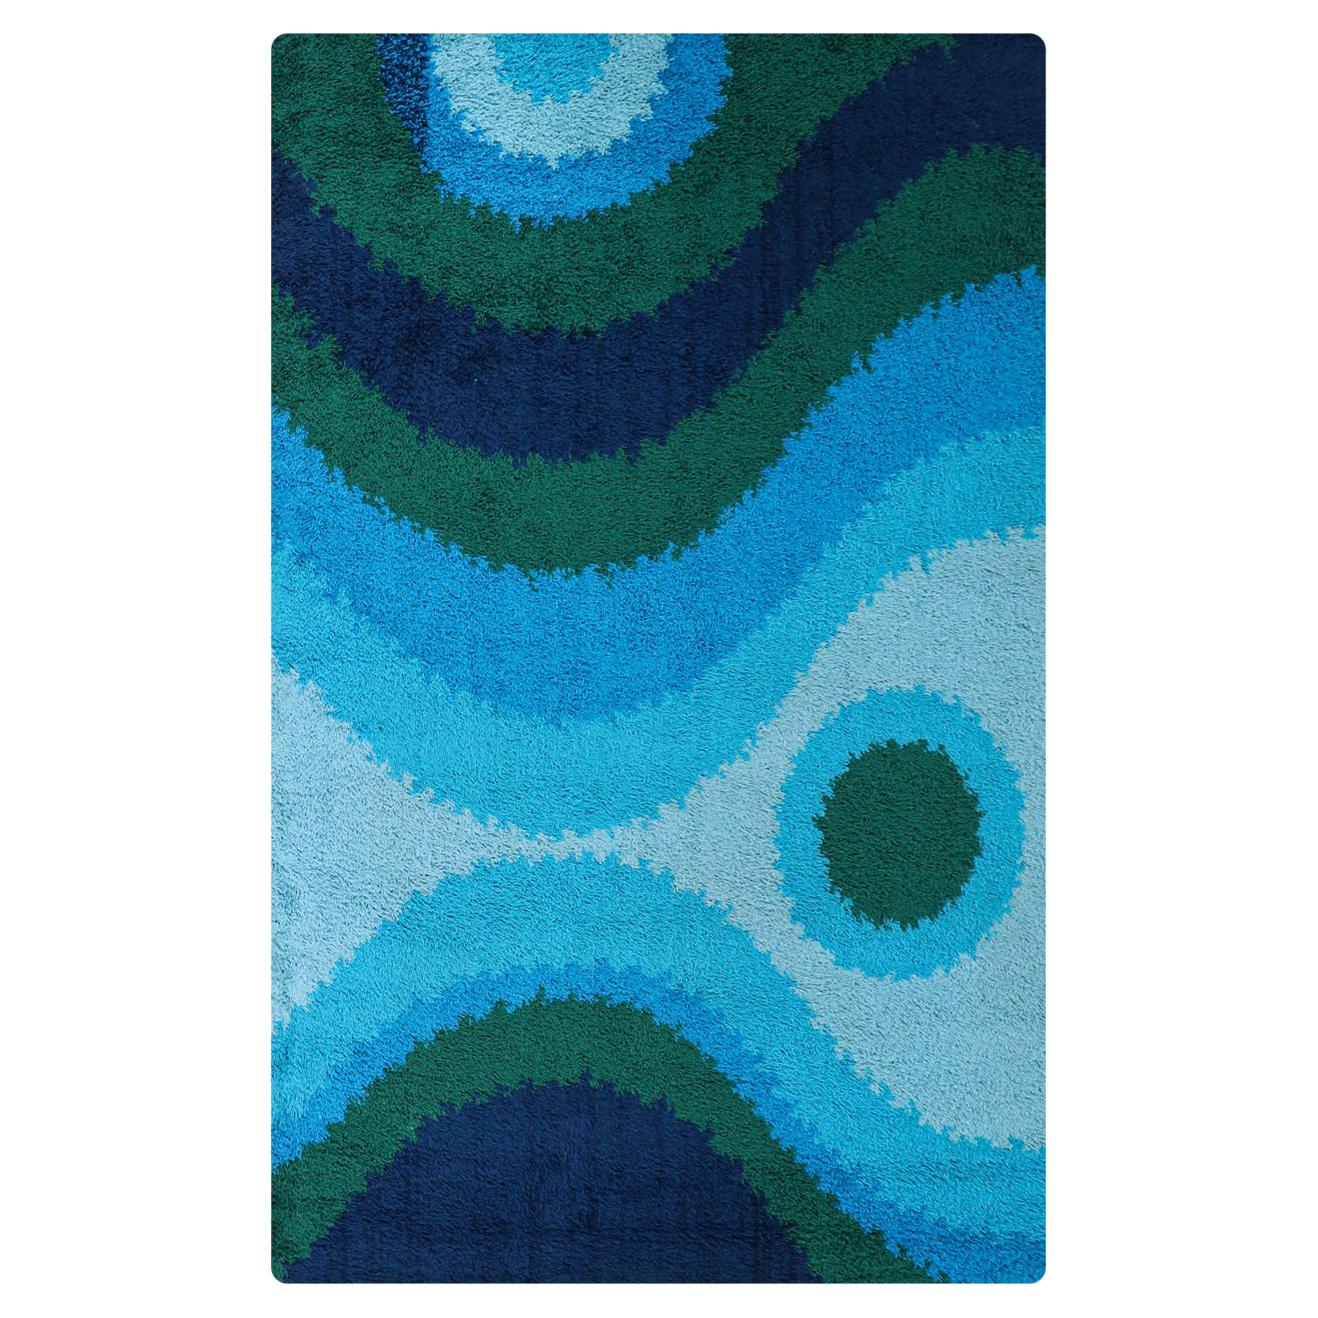 Large Danish Modern Hand-Knotted Blue/Green Wool Rug by Rya